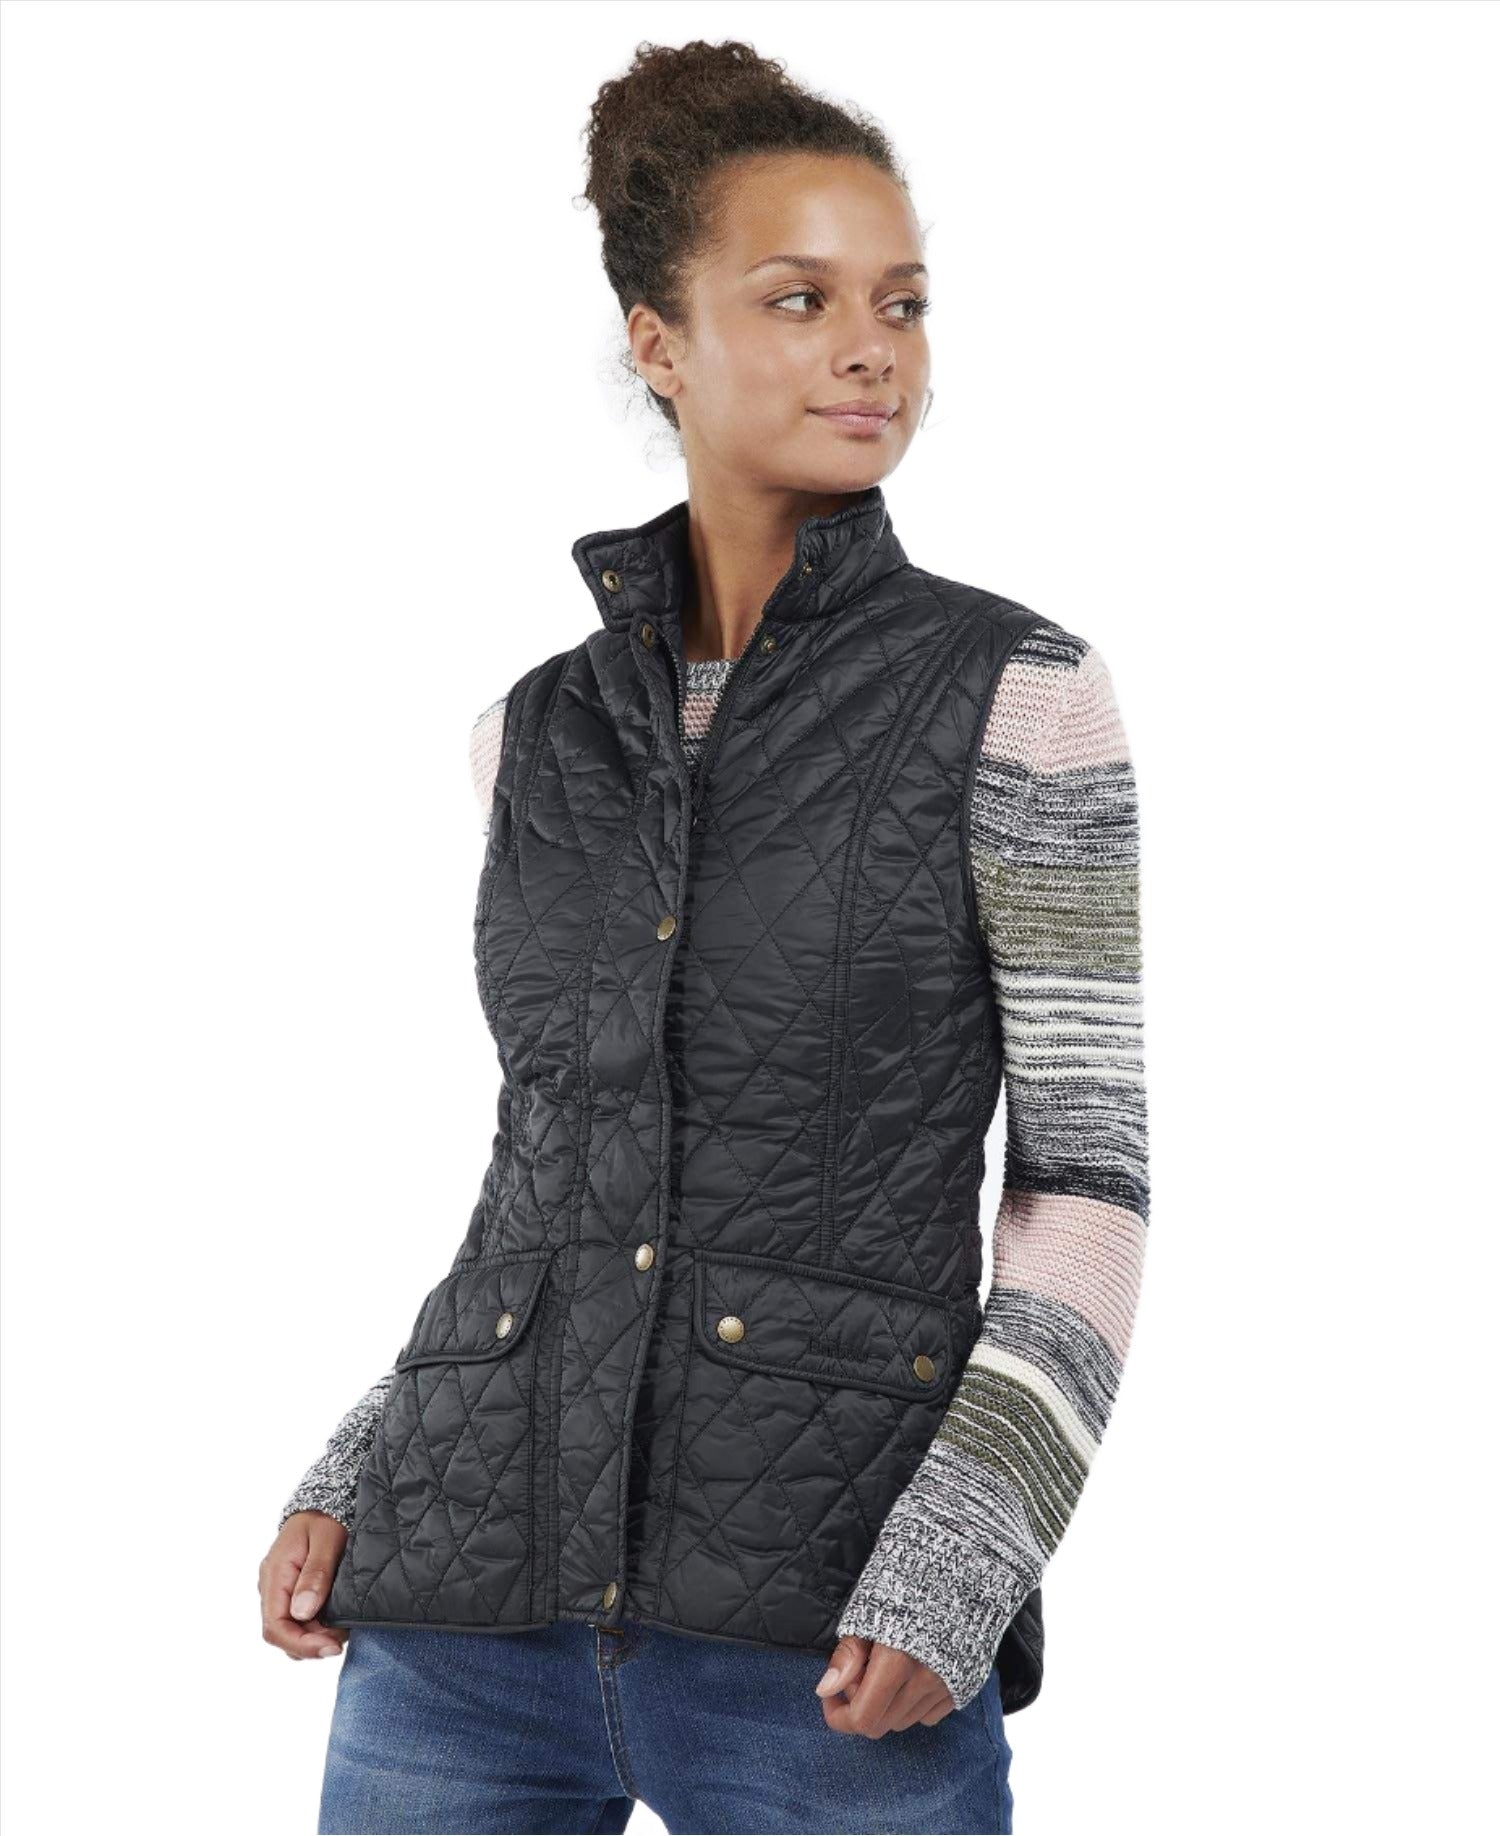 Barbour Otterburn Gilet - The Luxury Promotional Gifts Company Limited